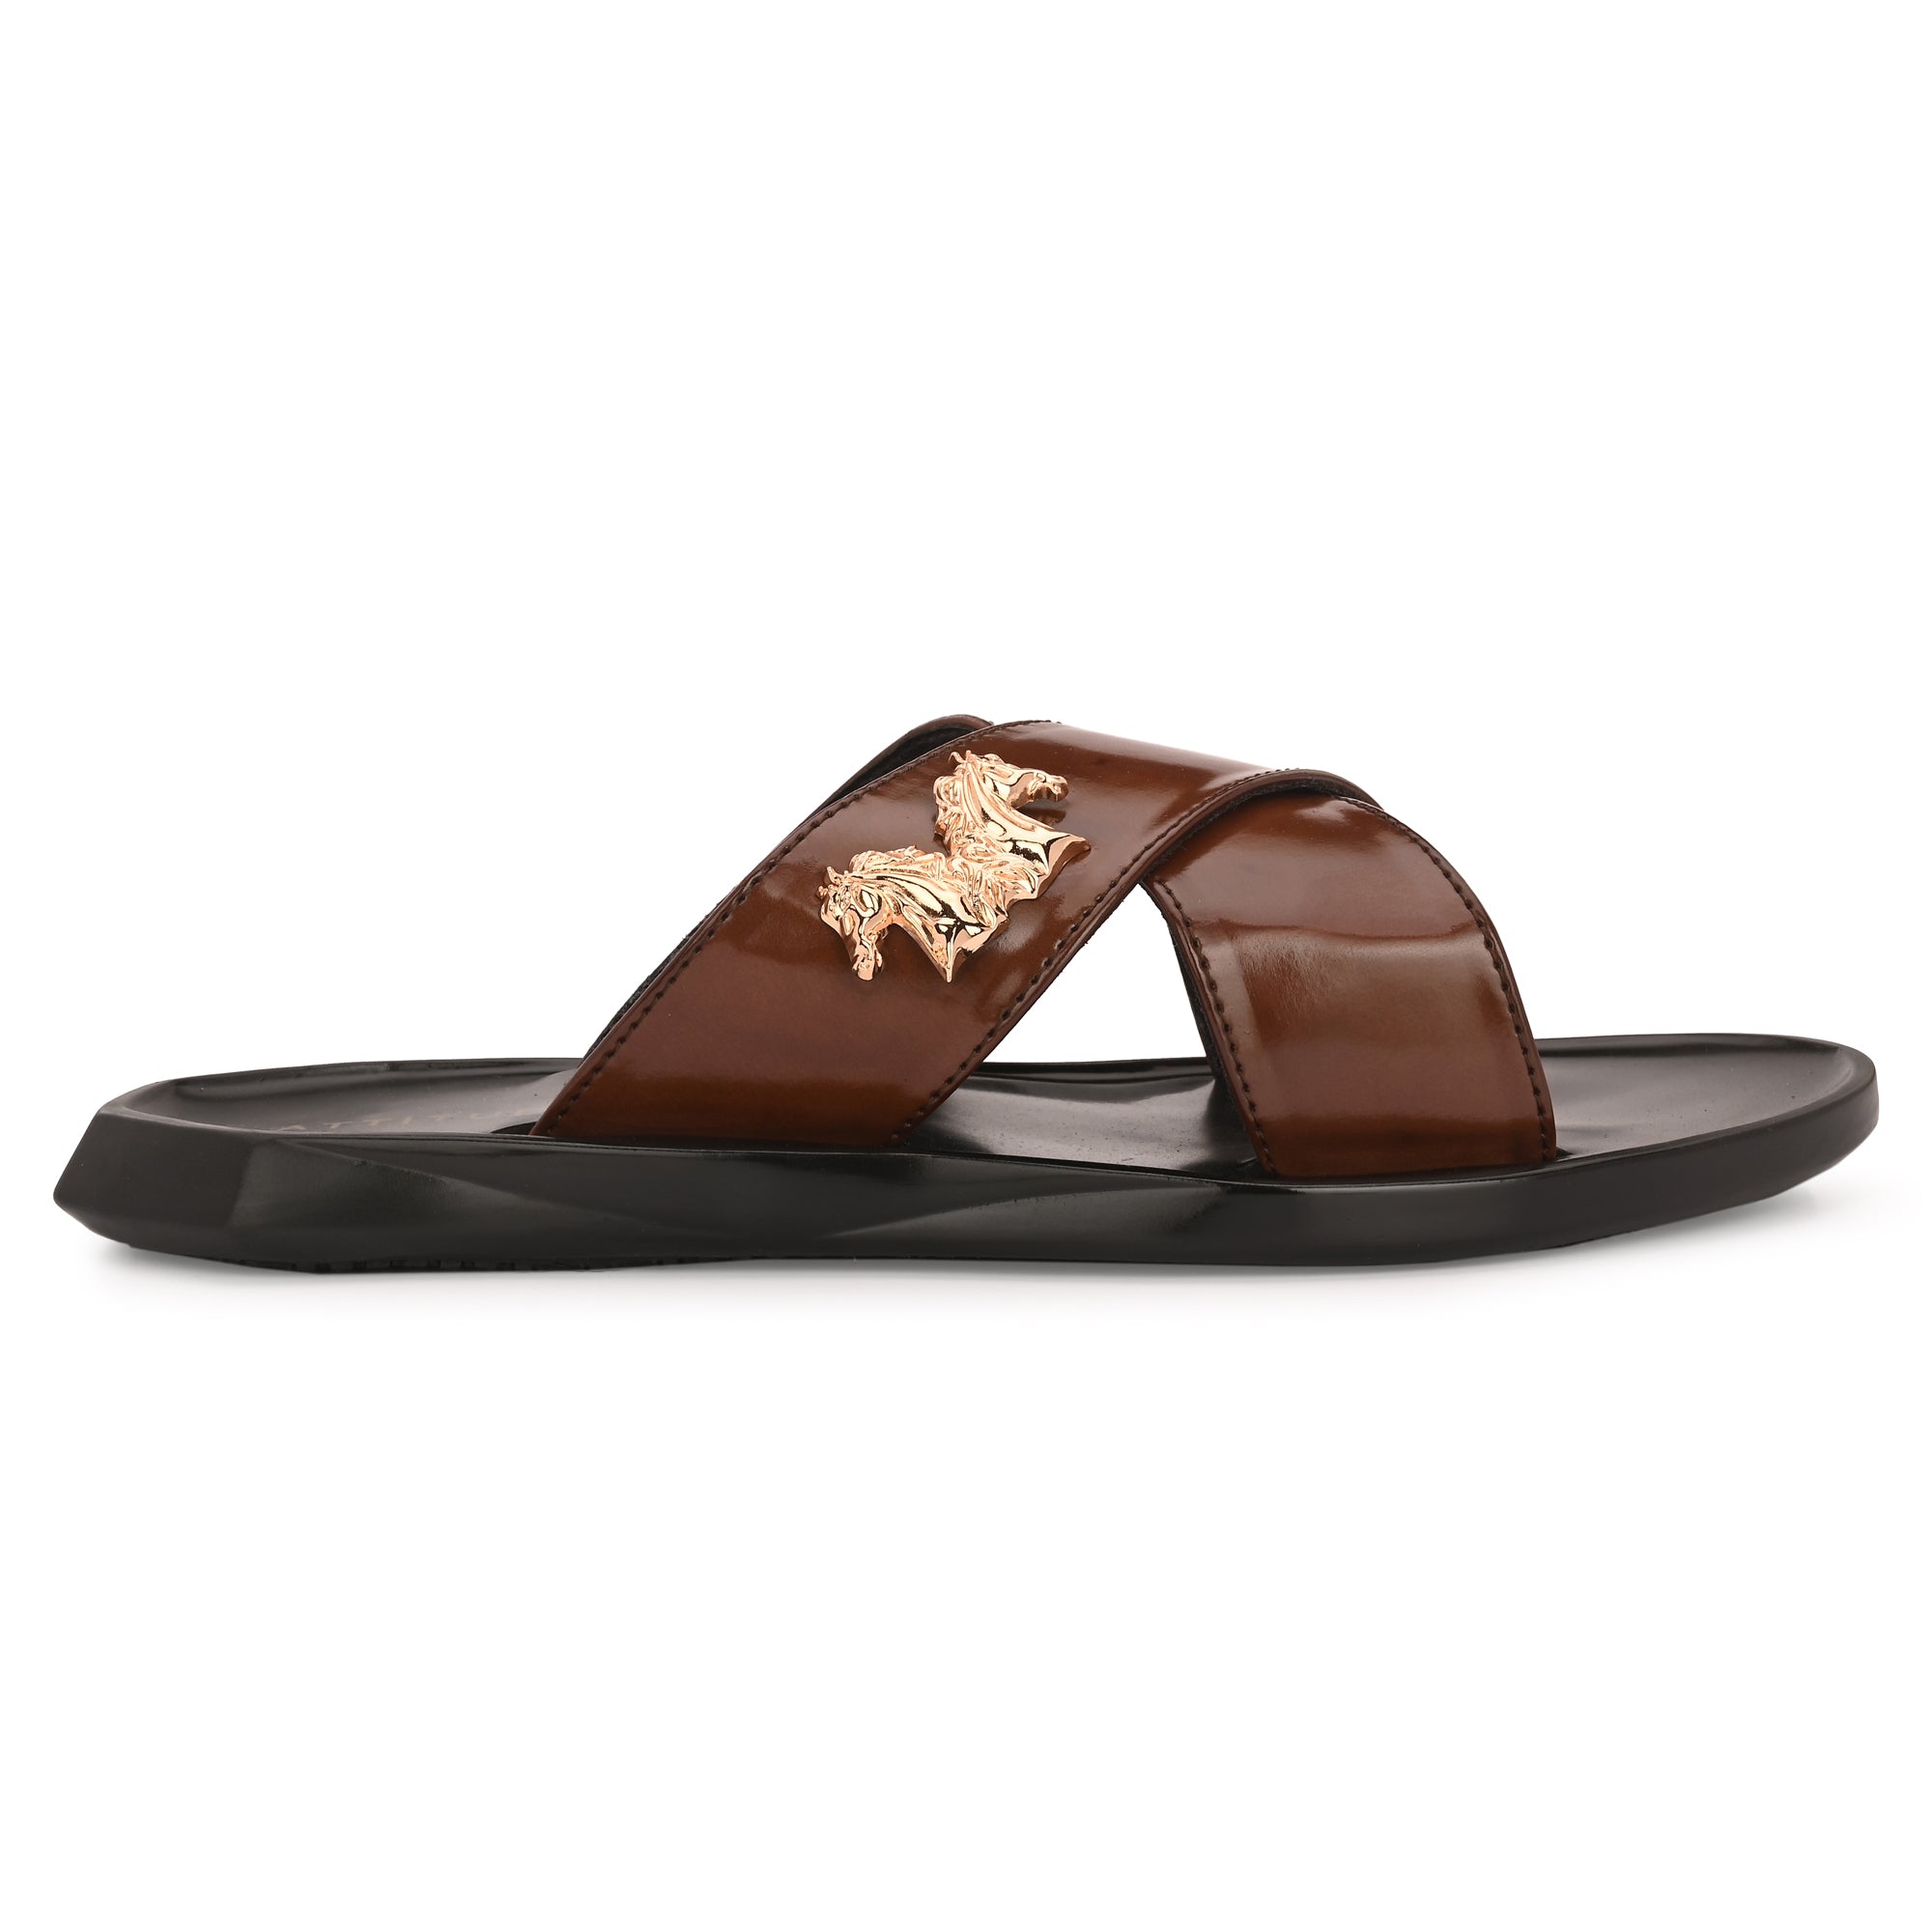 attitudist-brown-cross-over-slippers-for-men-with-rose-gold-side-brooch